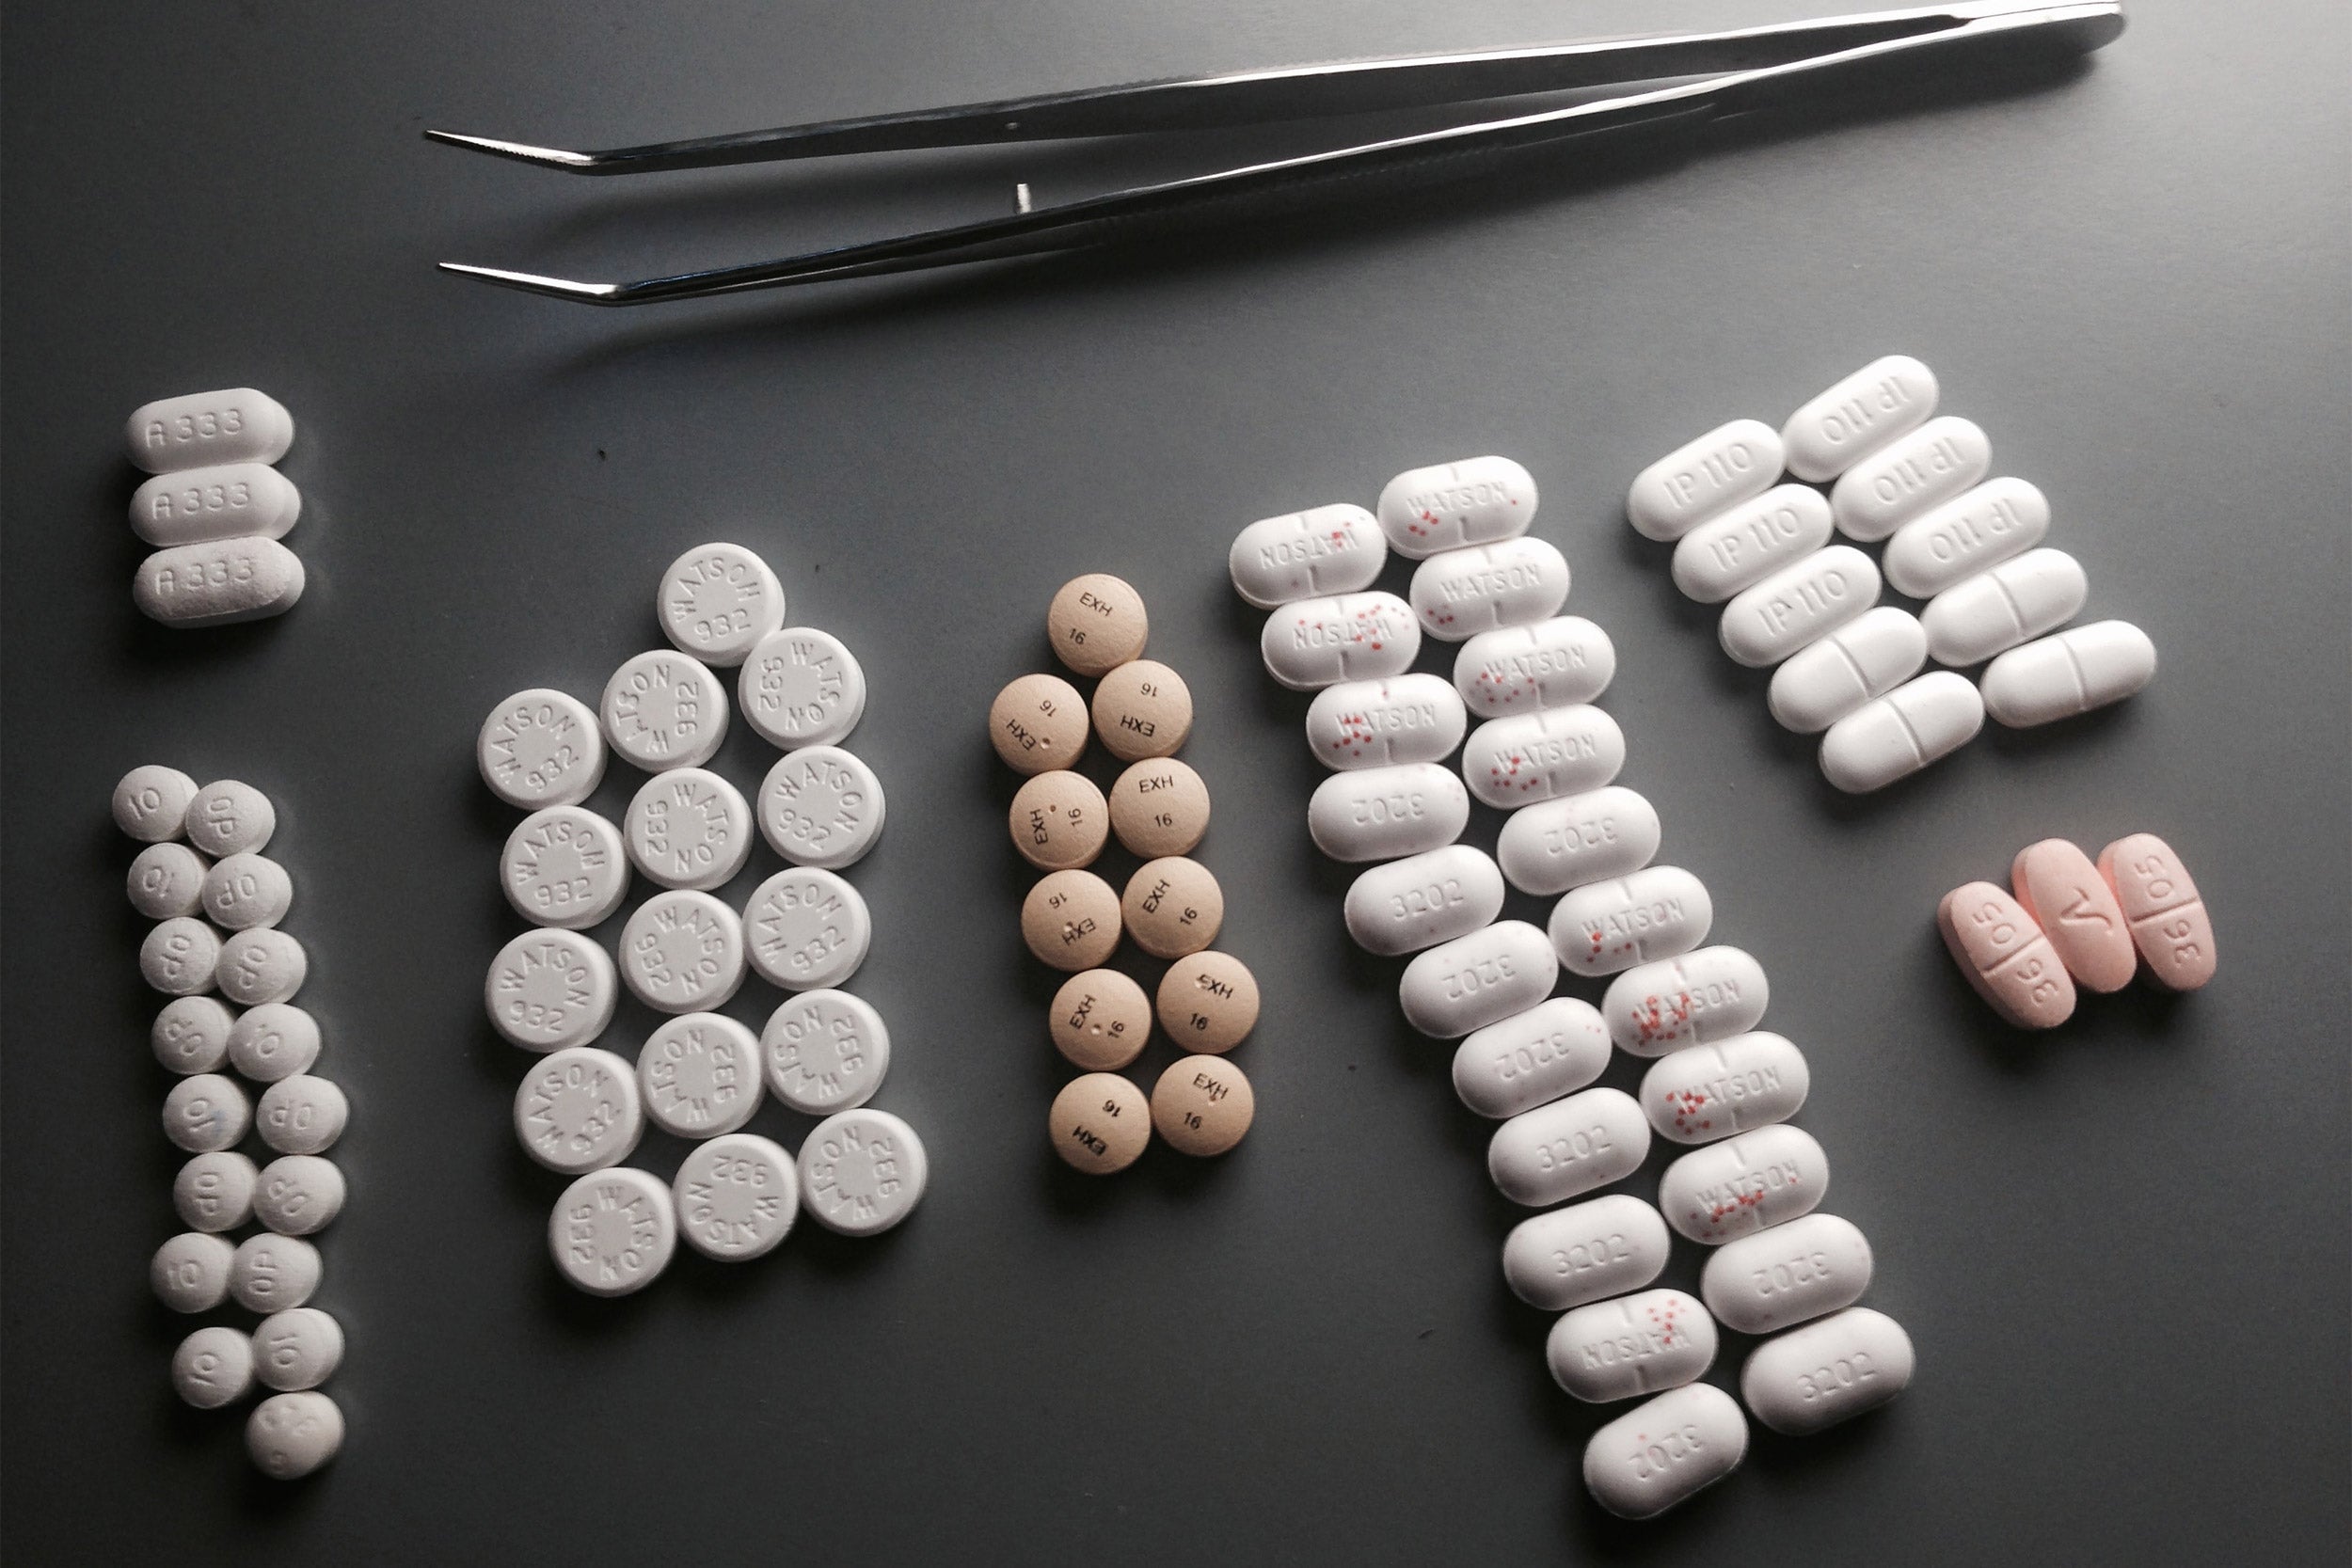 Pills laid out on a table.